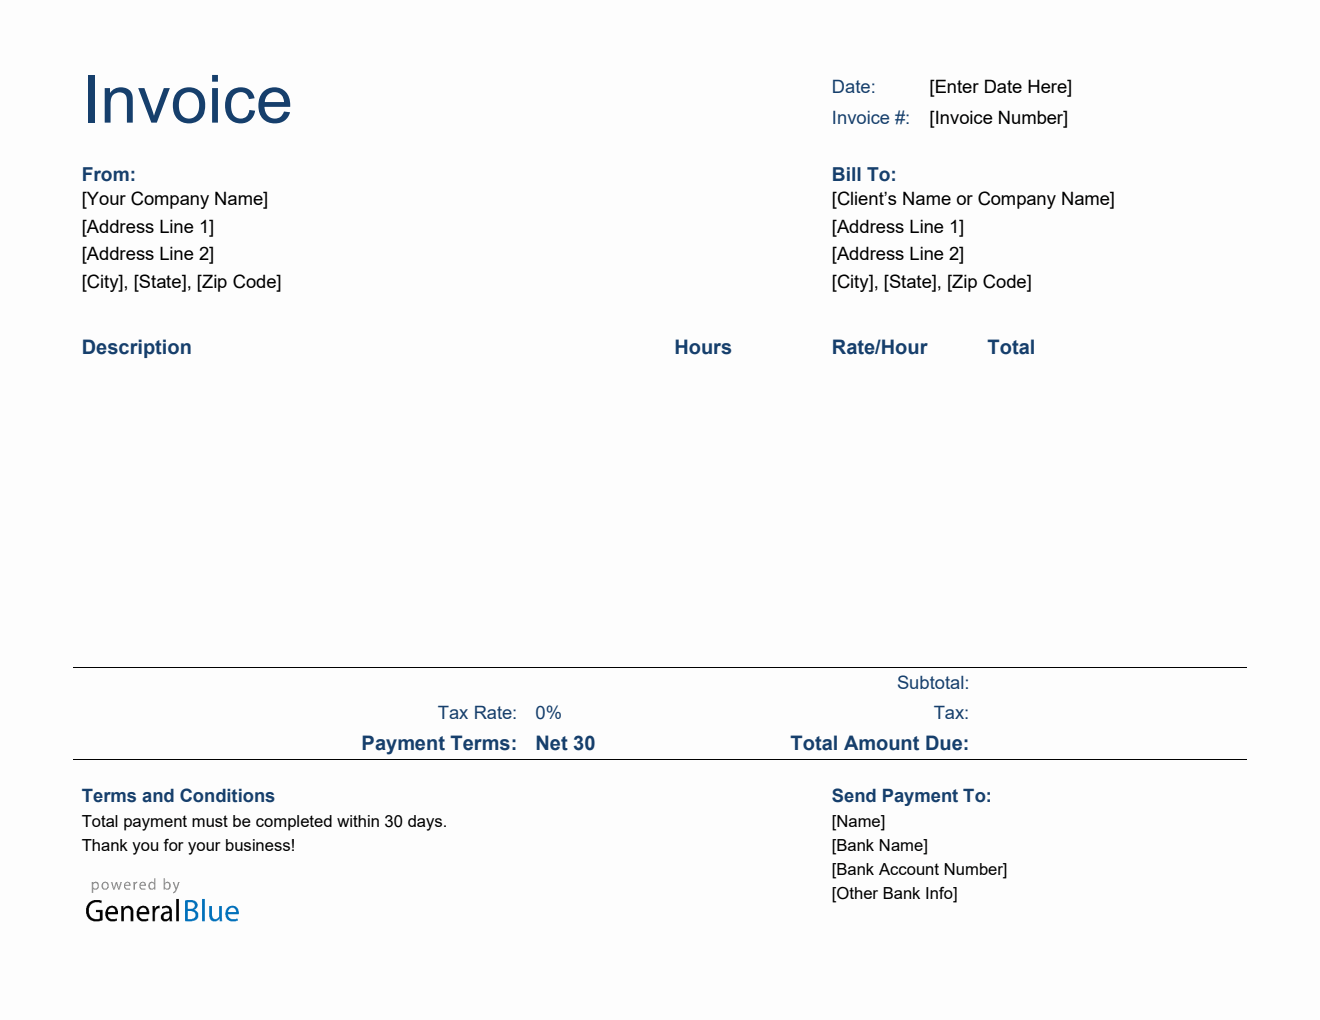 Word Invoice Template for U.S. Freelancers With Tax (Plain)